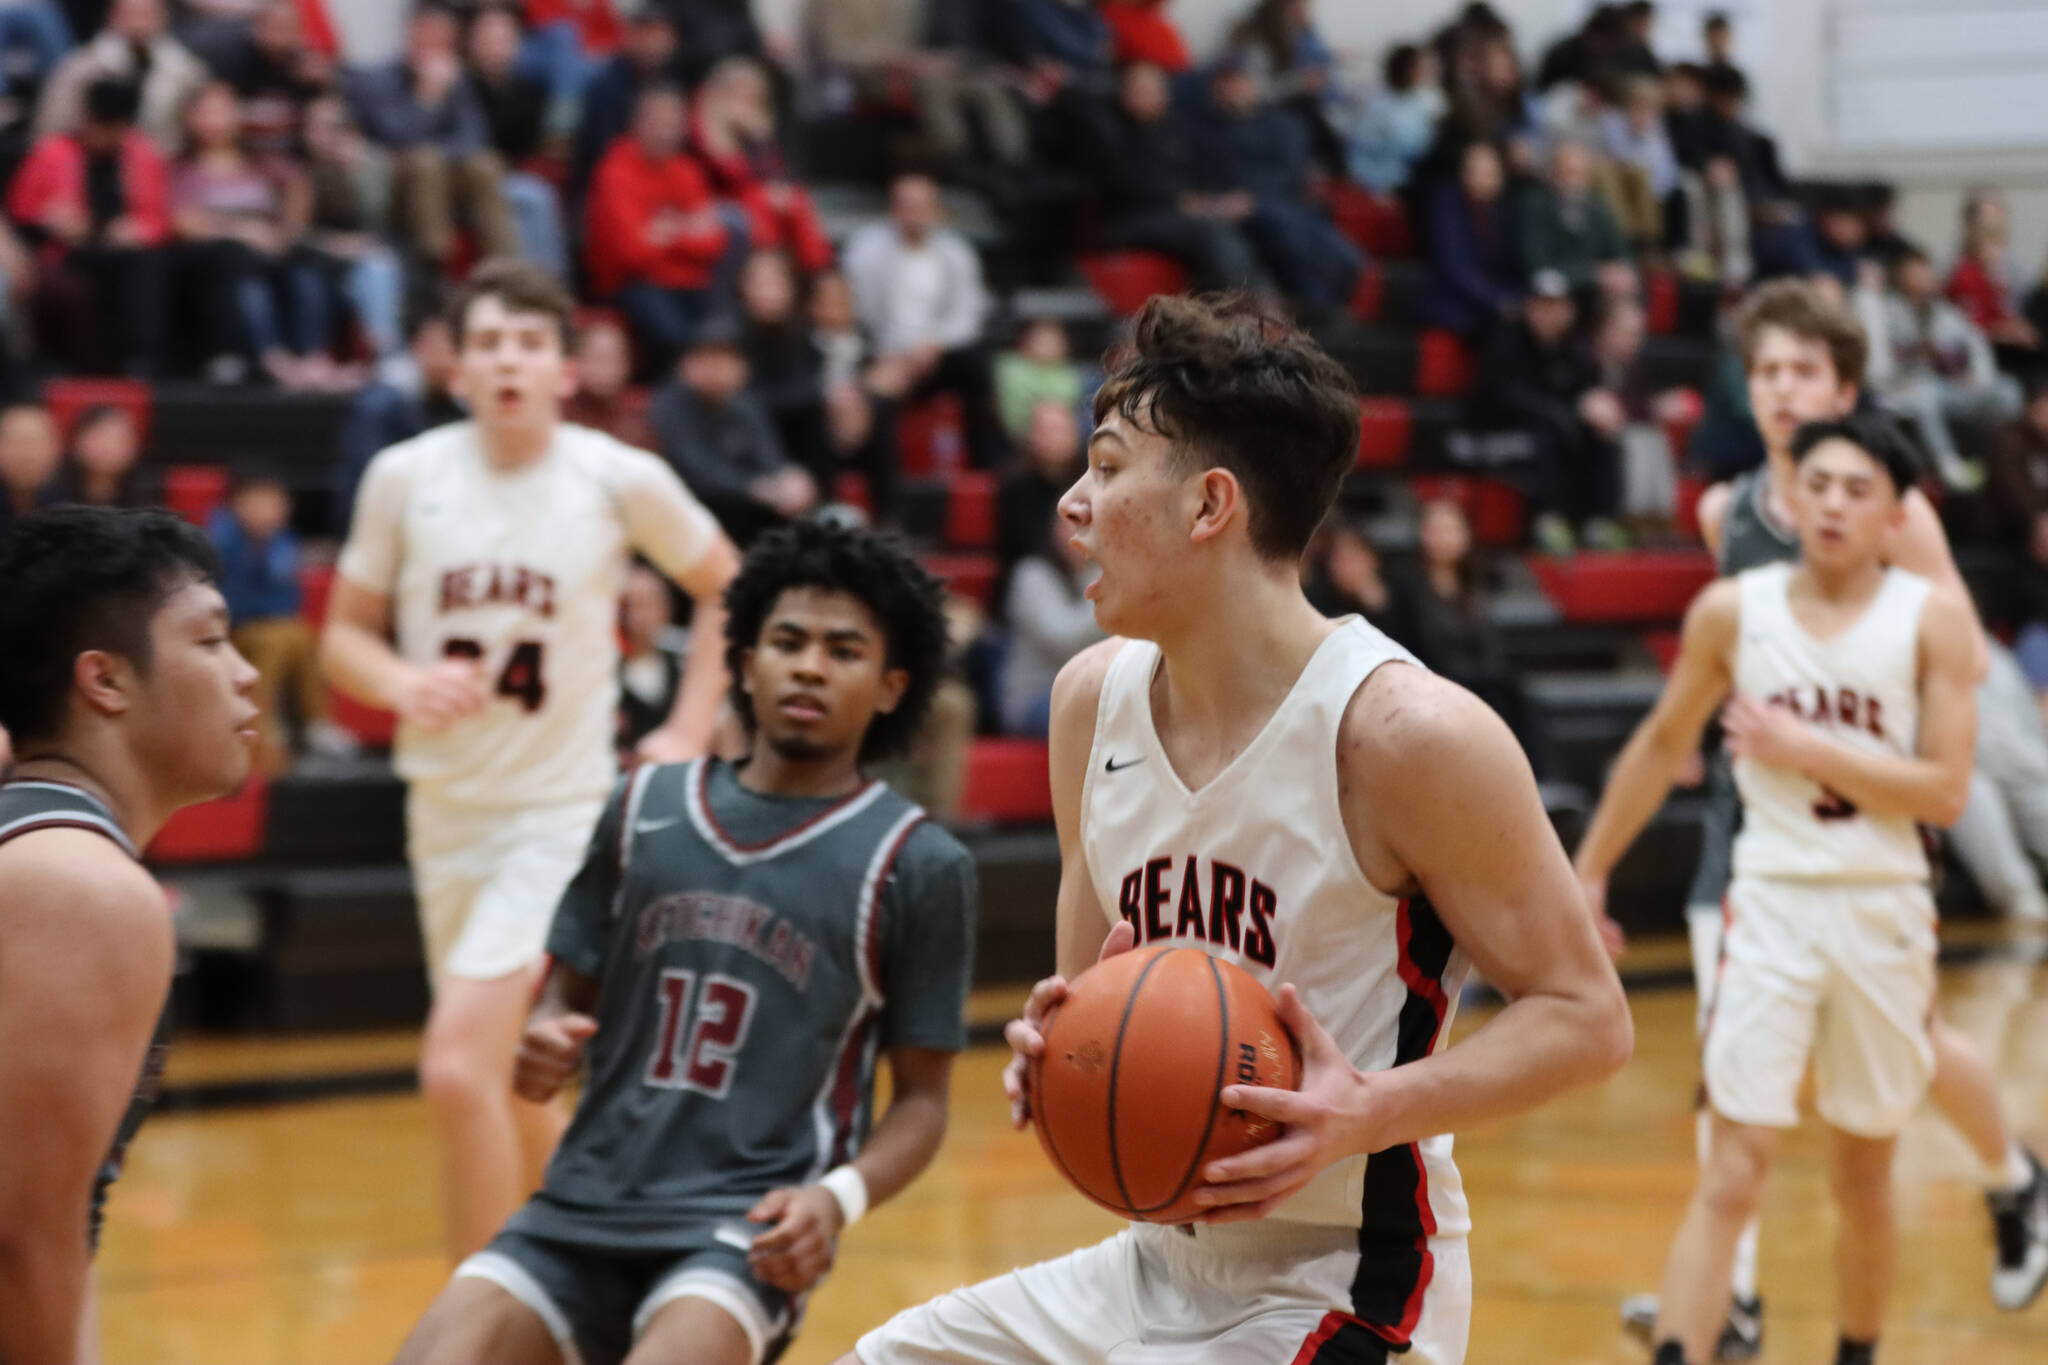 JDHS senior Orion Dybdahl comes in for a lay up during the second conference game at home against Ketchikan High School on Saturday night. Dybdahl led his team in scores for a total of 23 points. (Jonson Kuhn / Juneau Empire)